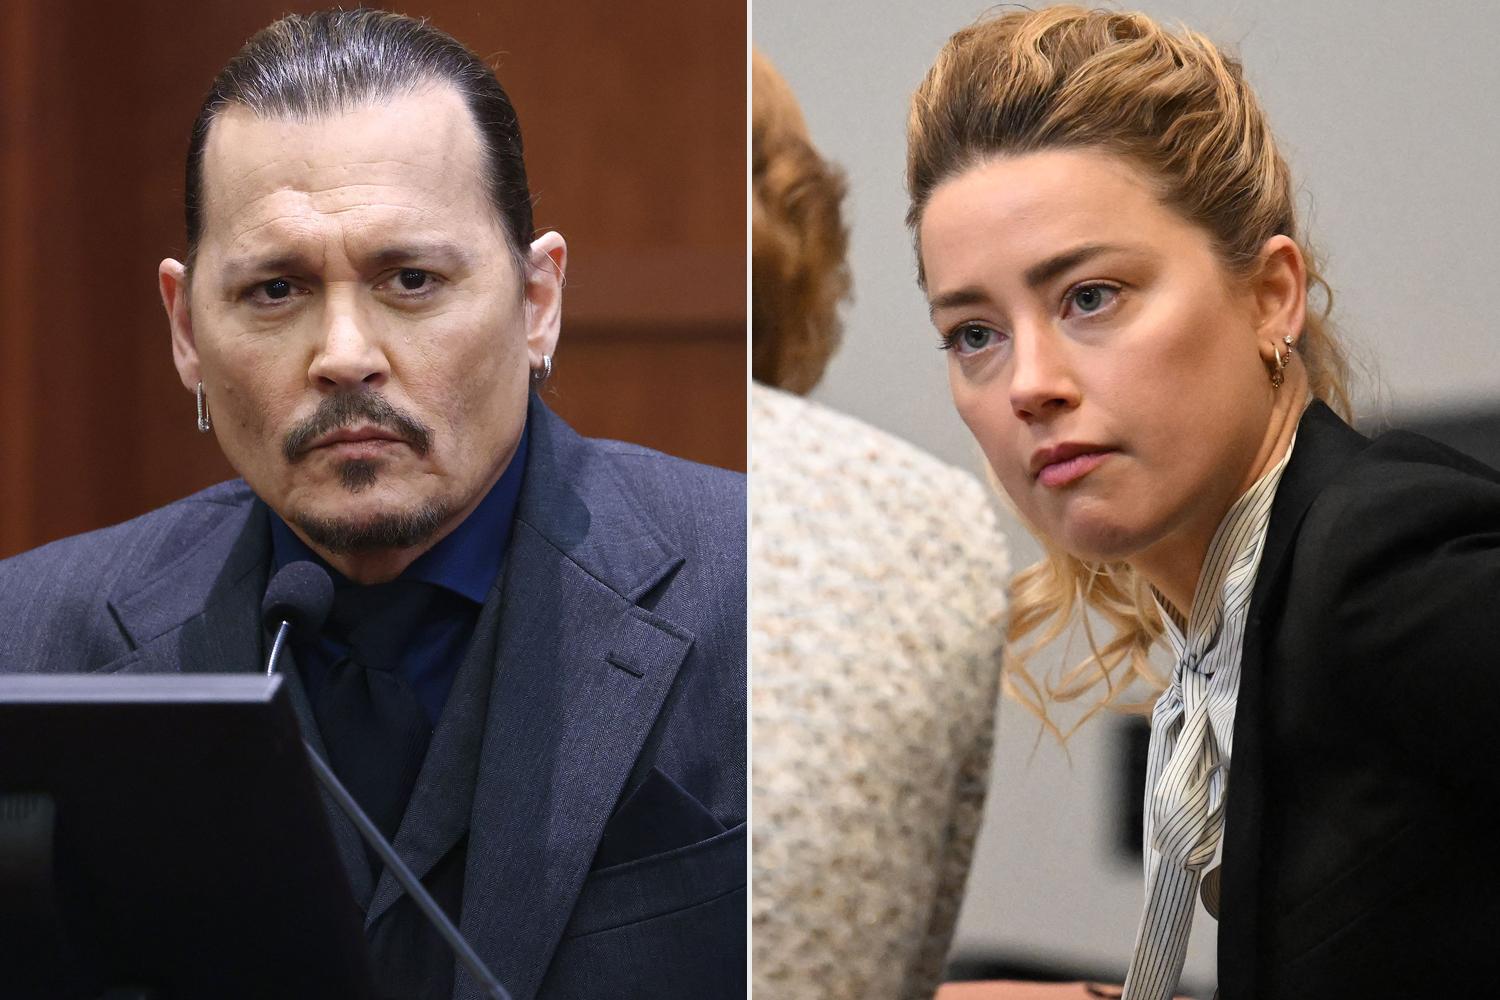 Finally, Johnny Depp's side also officially spoke about Amber Heard's disastrous performance in court - Photo 3.